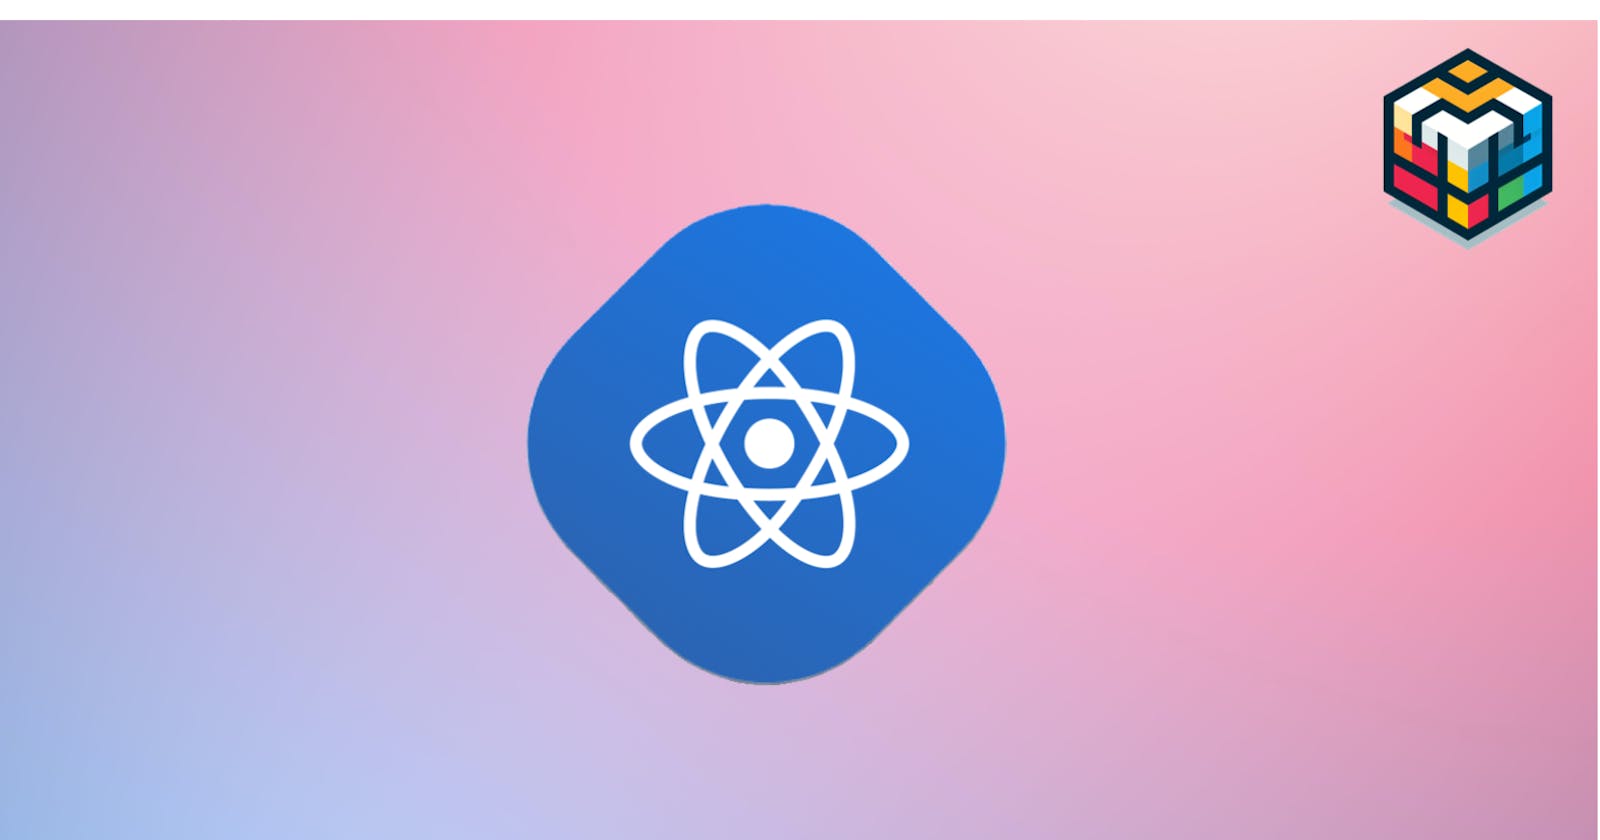 Common Errors in React JS Project Why It Happens?, What are the Solutions?